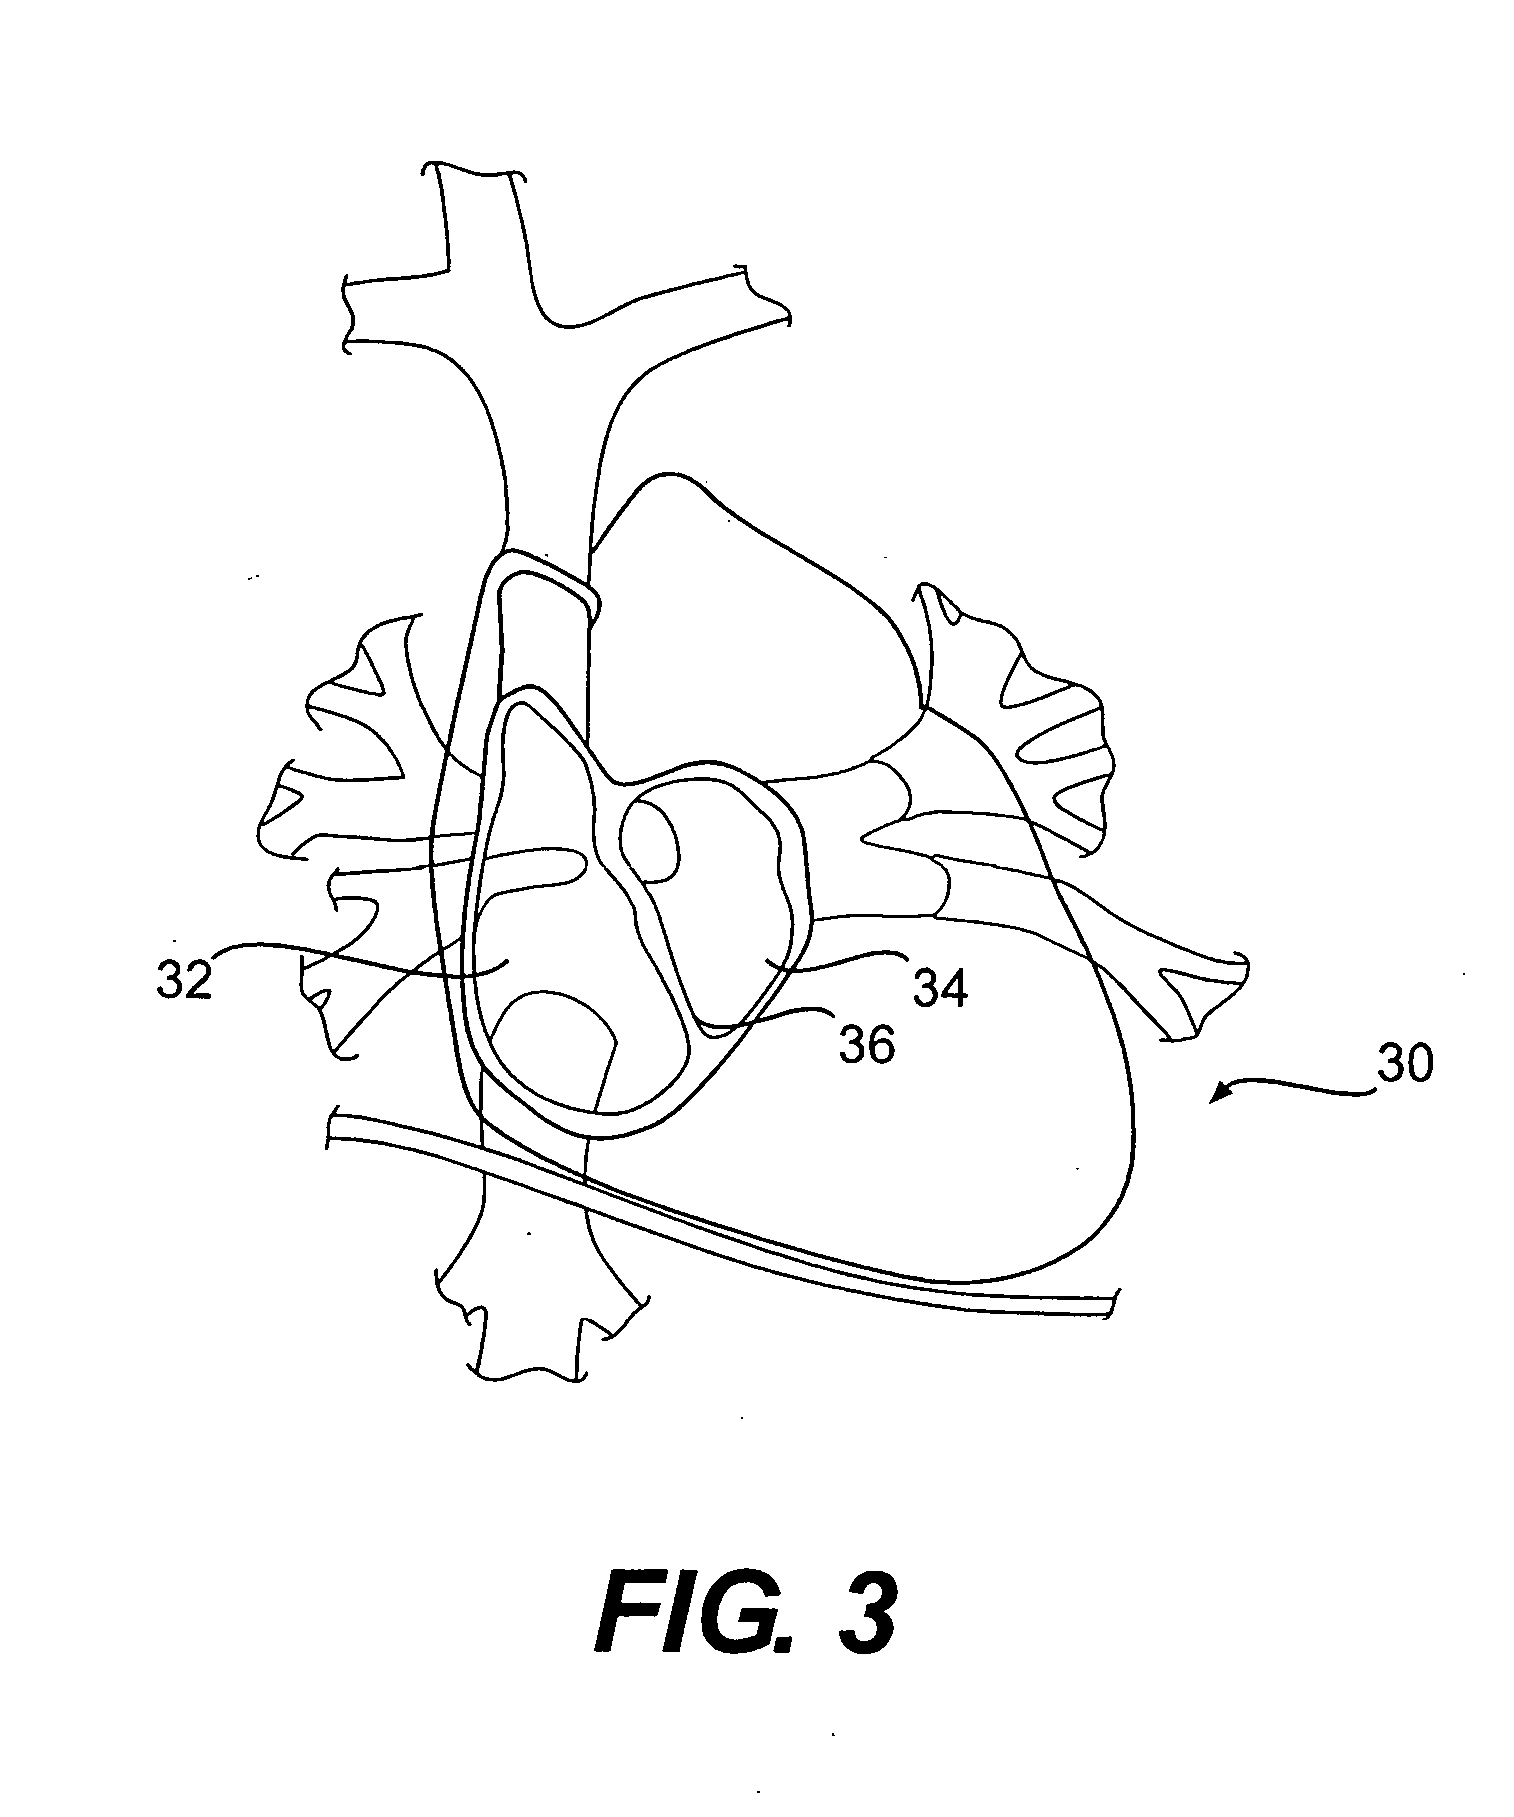 Implantable device for telemetric measurement of blood pressure/temperature within the heart